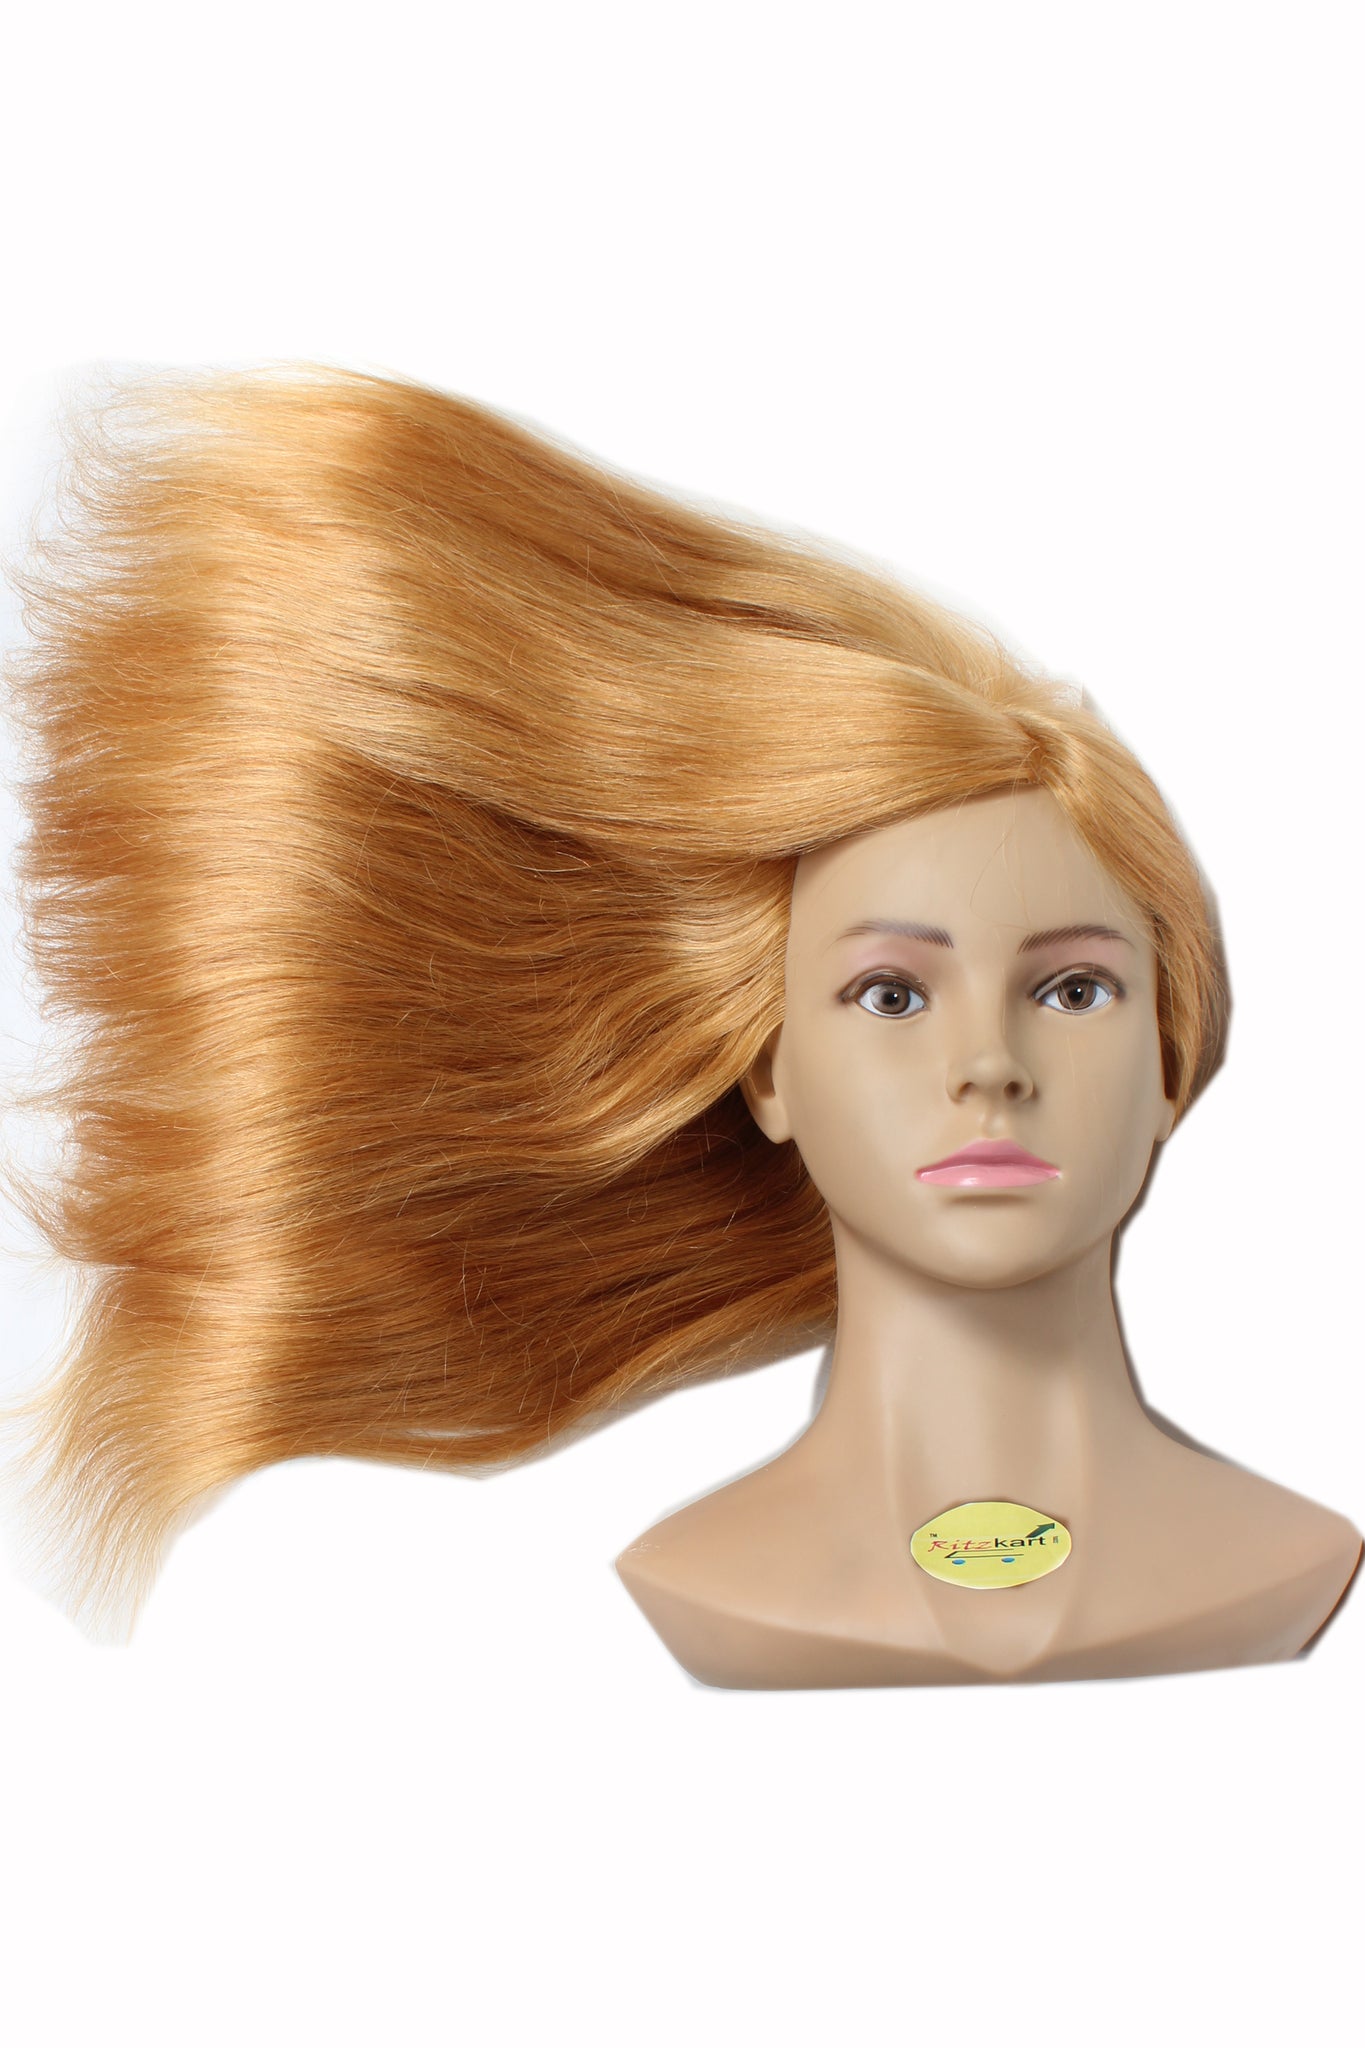 Ritzkart IMPORTED brand 27-29 inch long heavy & soft Hair Dummy, Real Human Blonde Hair + high temperature Training Head With Shoulder High Grade Hairdressing Head Dummy